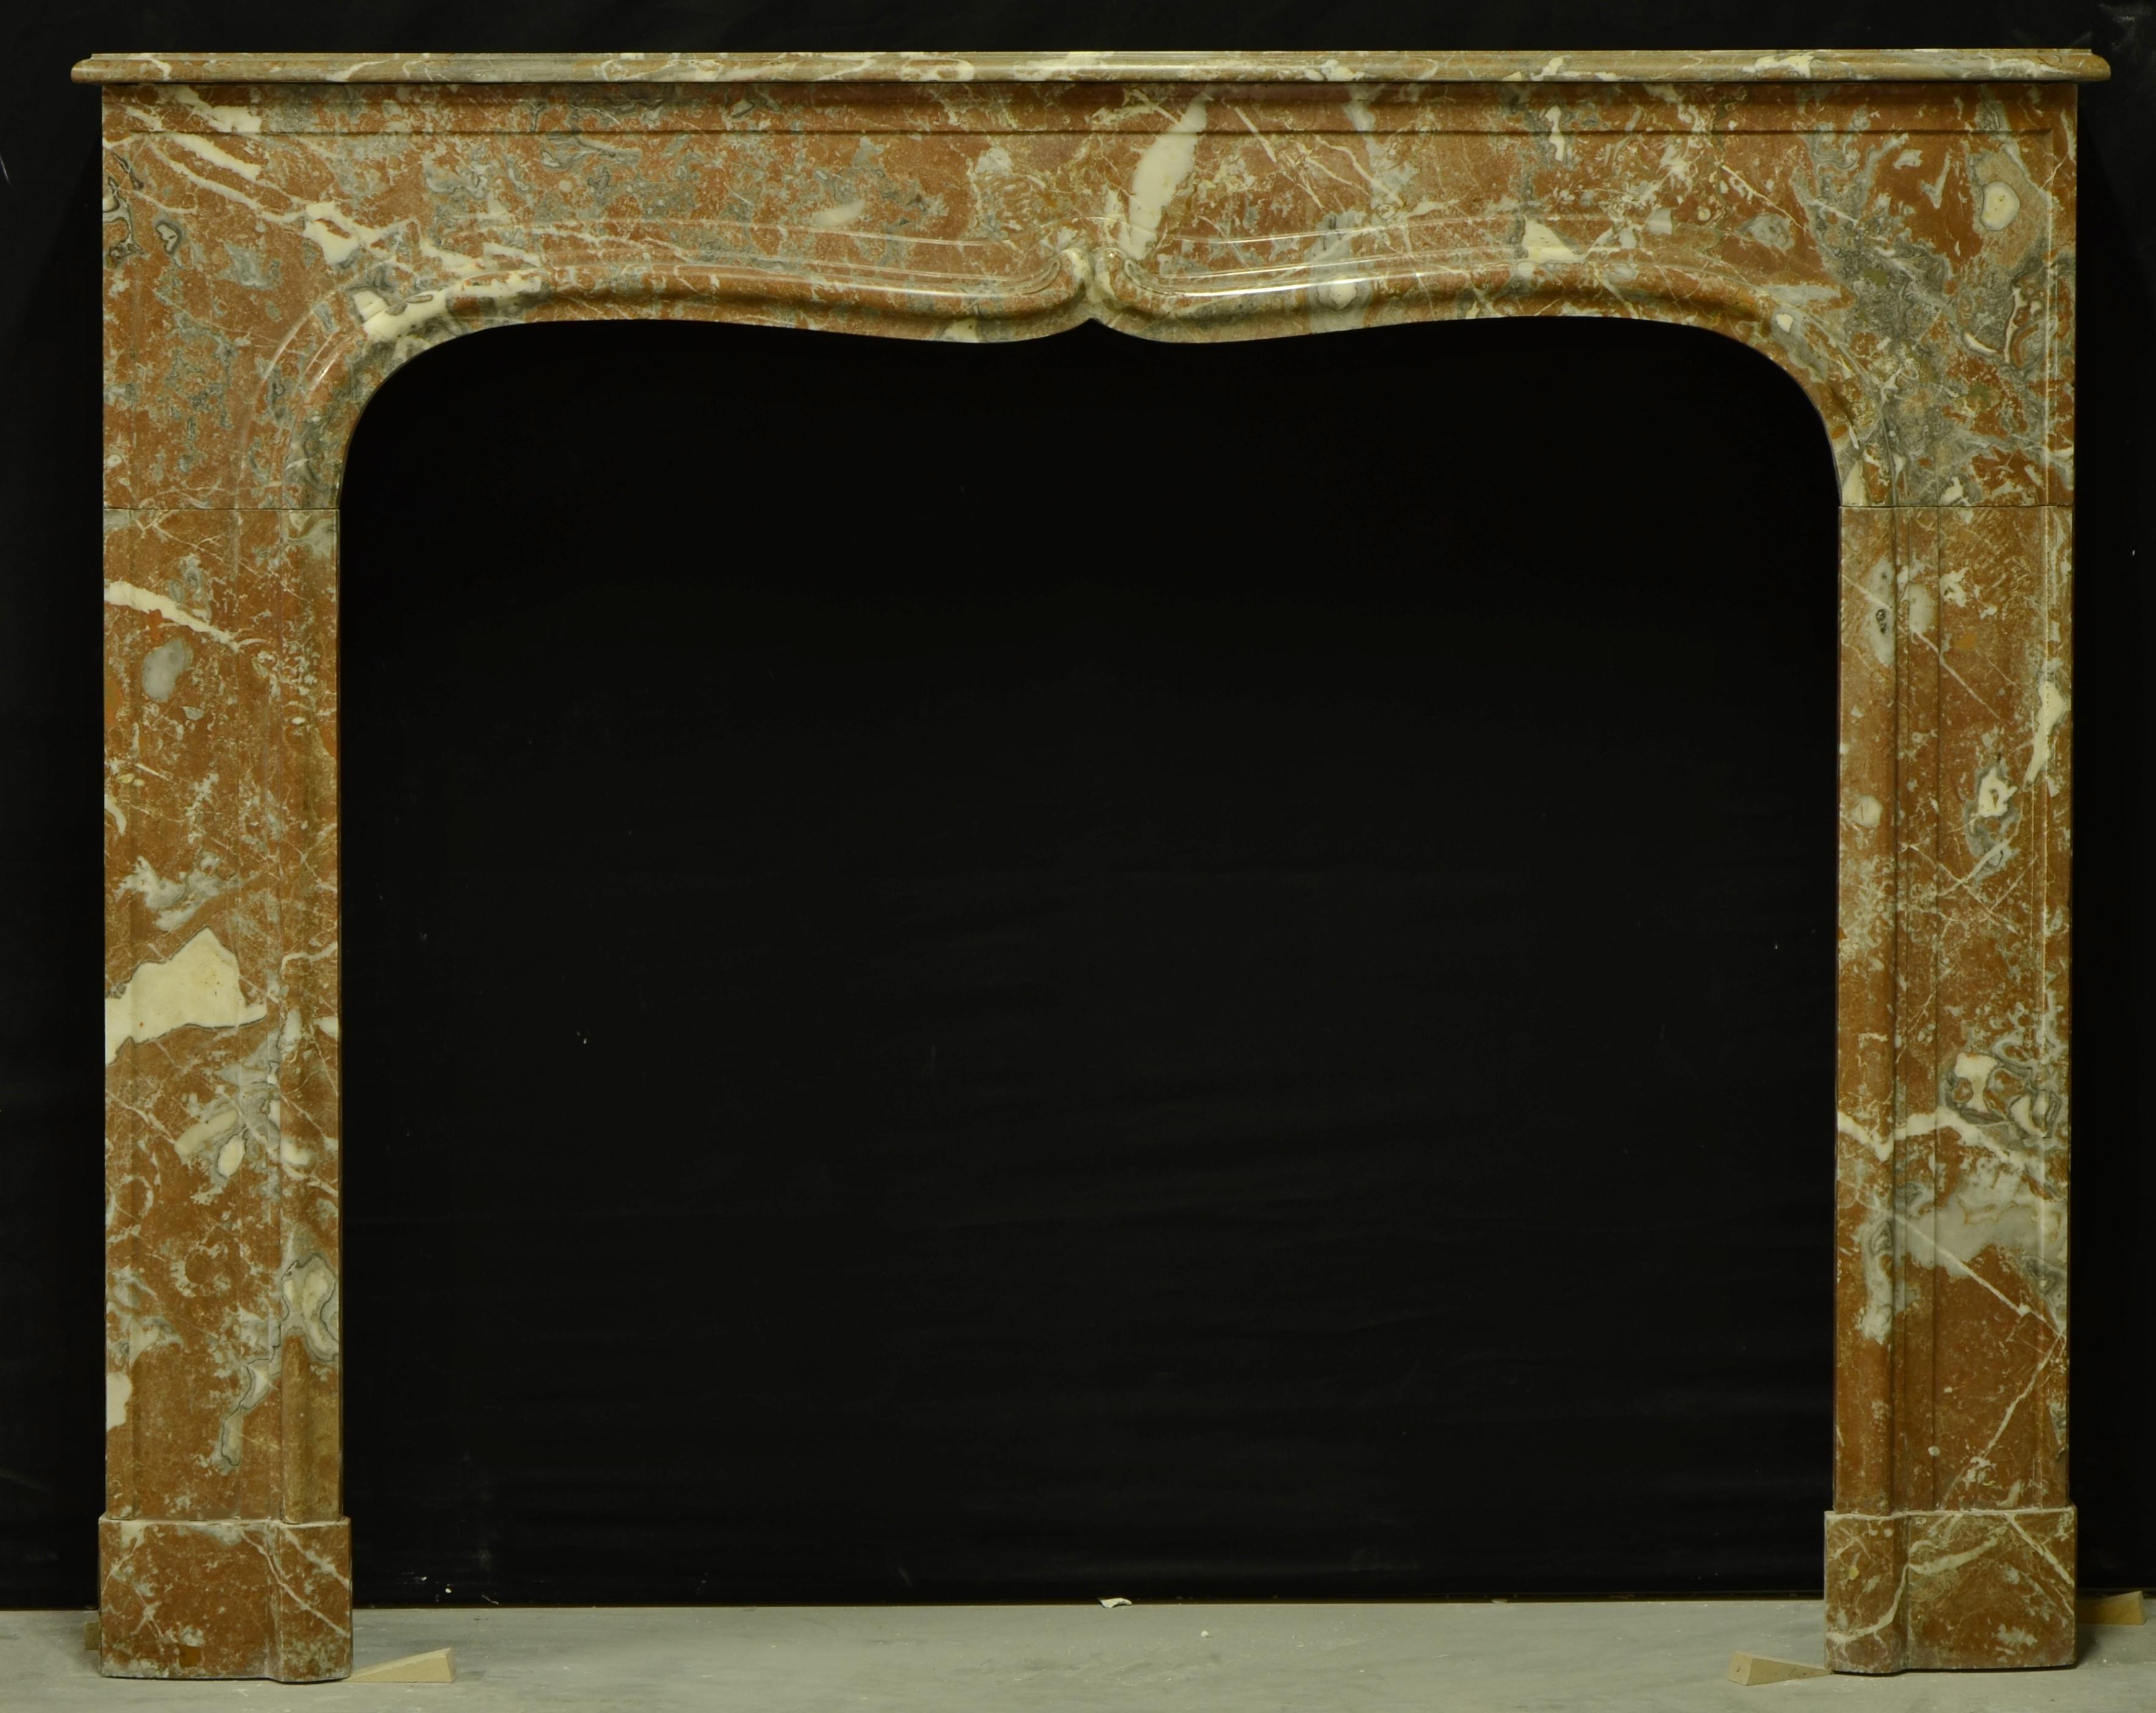 A nice French marble Louis XIV fireplaces mantel.
The gracious lines and perfect sizing makes this nice piece very versatile.

Would be great in a master suite or 